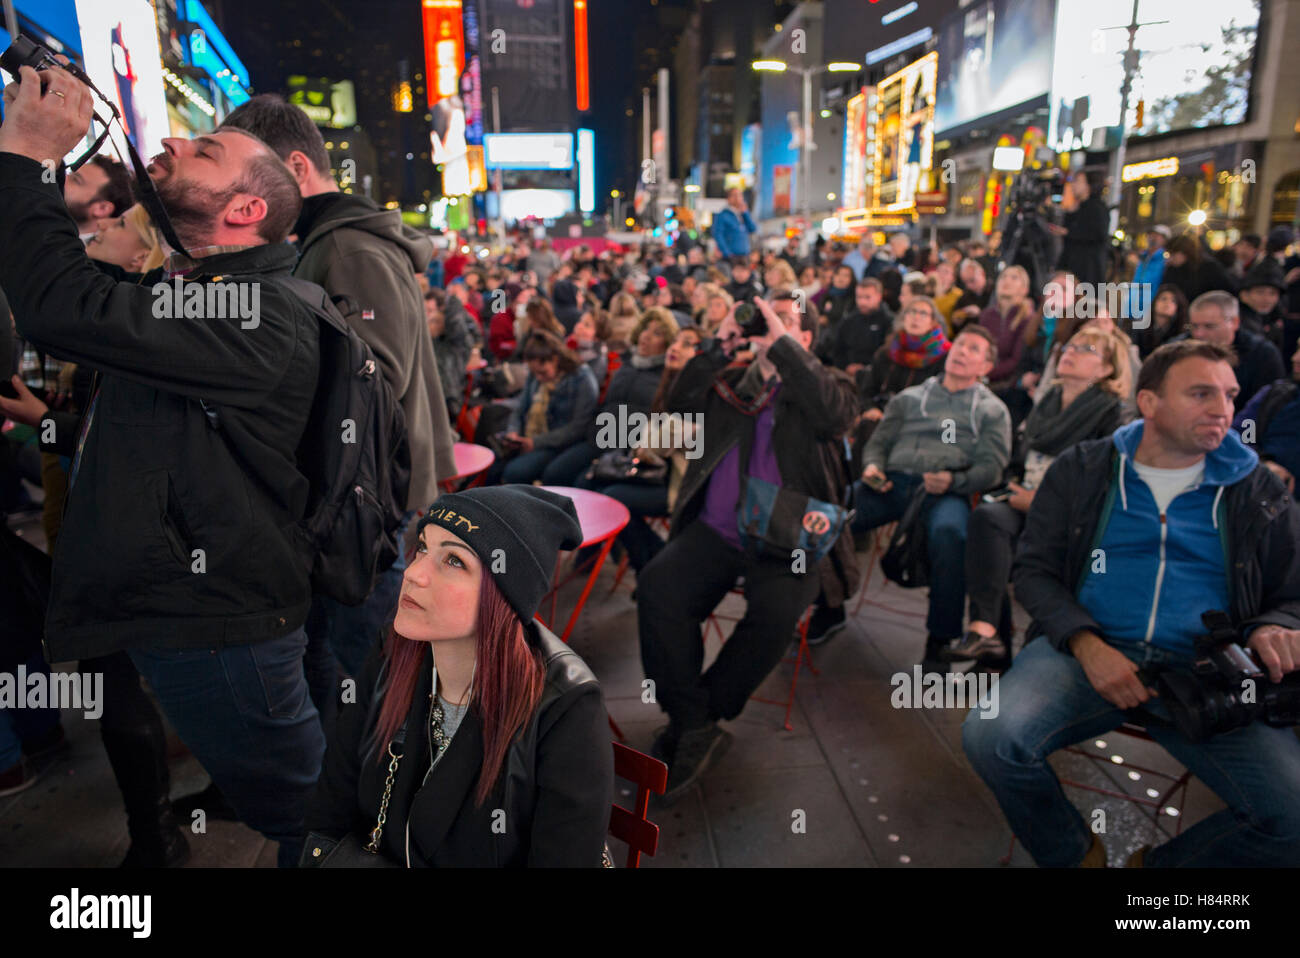 New York, New York, U.S.  November 8, 2016.  A crowd in Times Square watches election results on giant screen showing Fox News Credit:  Joseph Reid/Alamy Live News Stock Photo